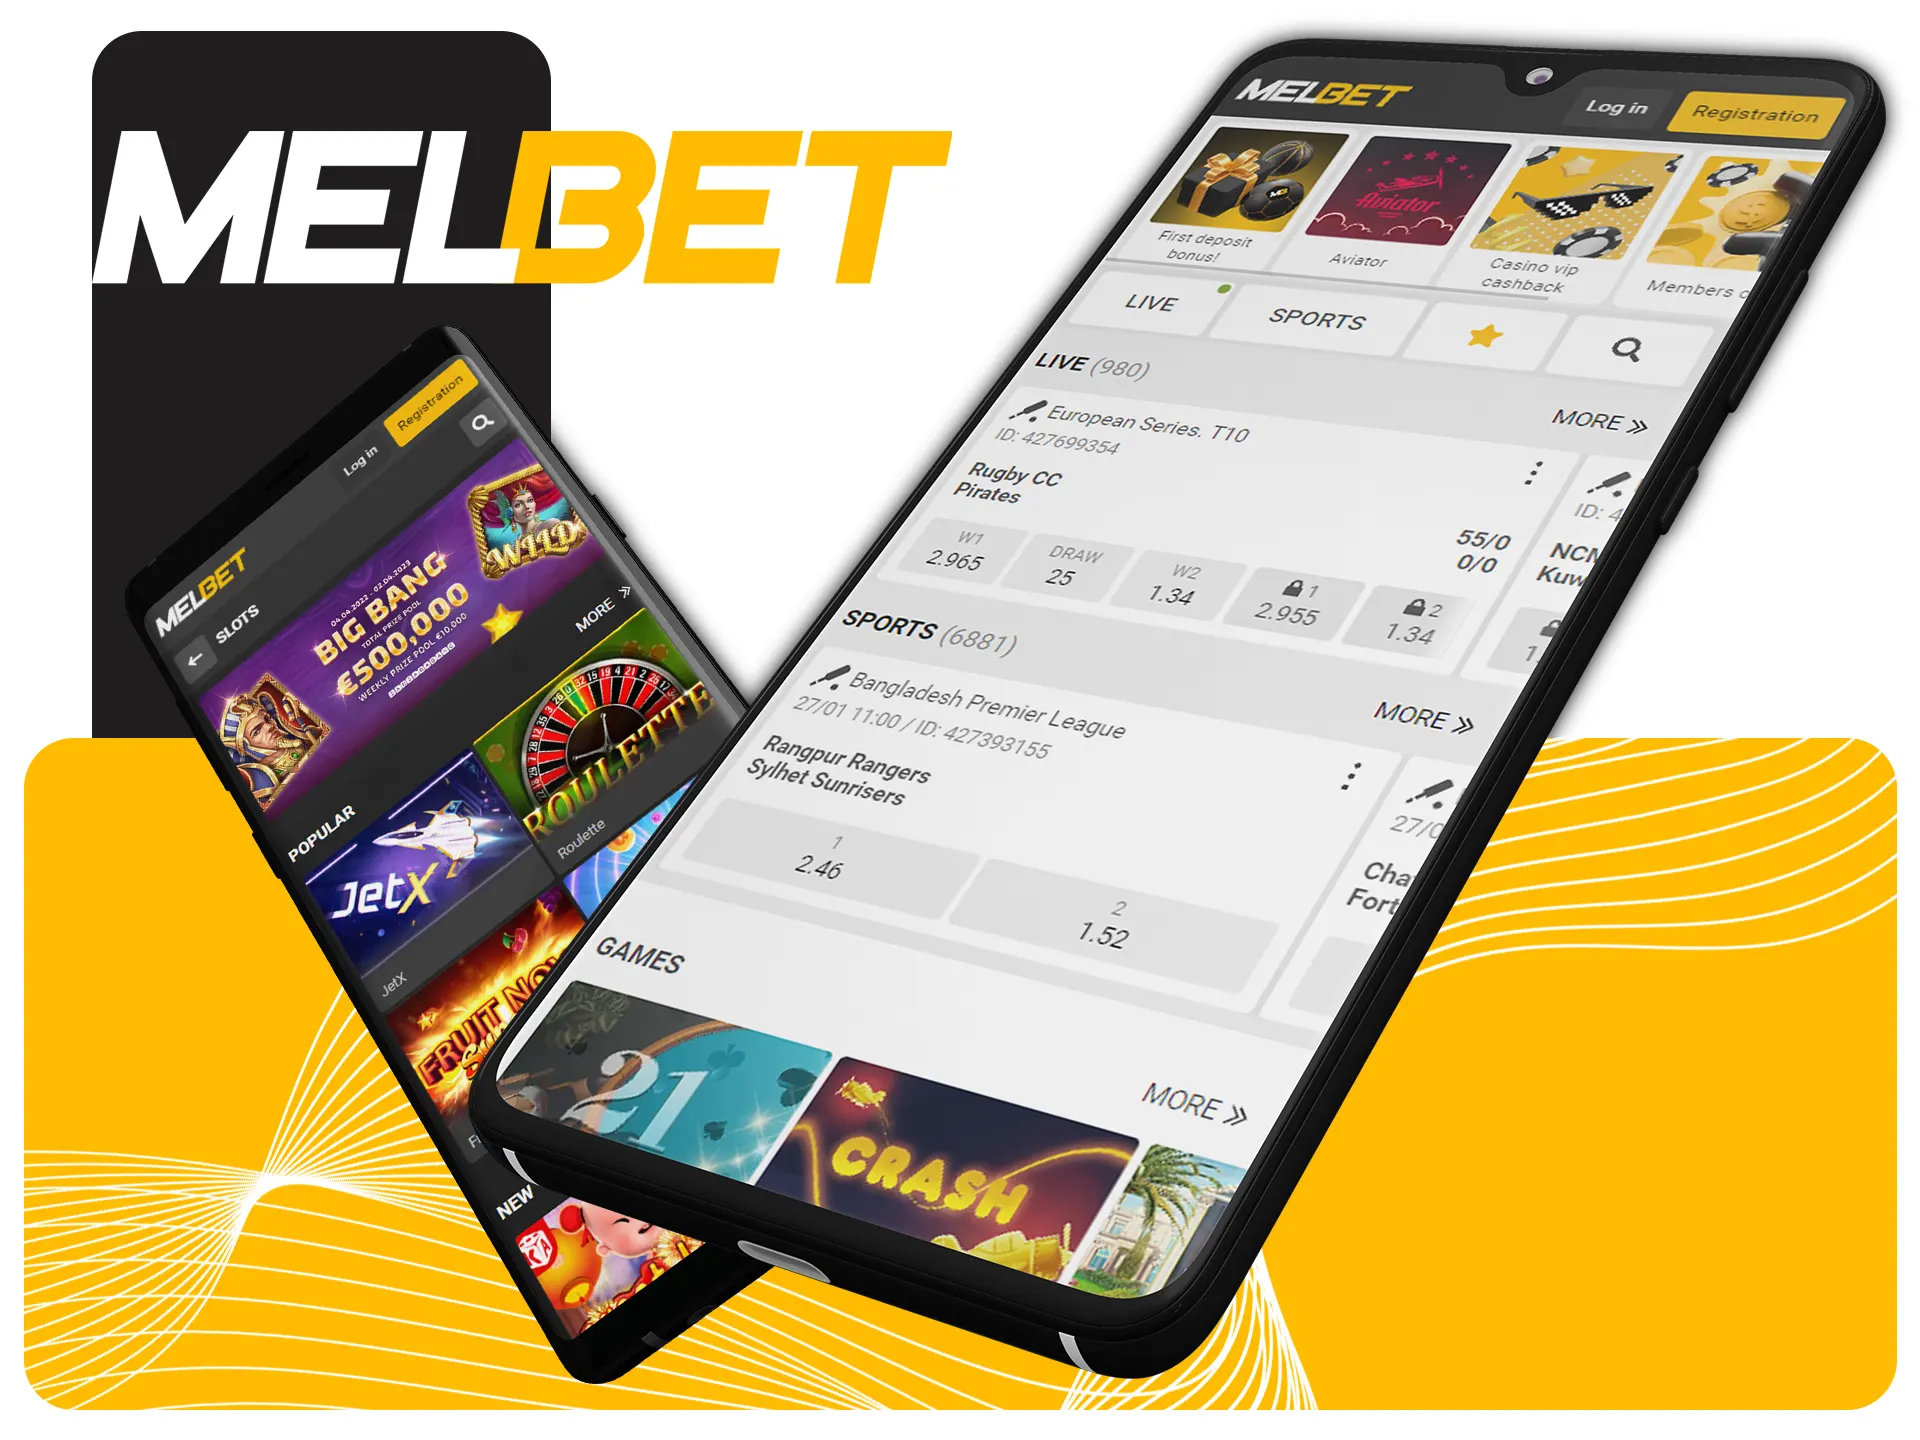 Melbet app is very convinient for use.